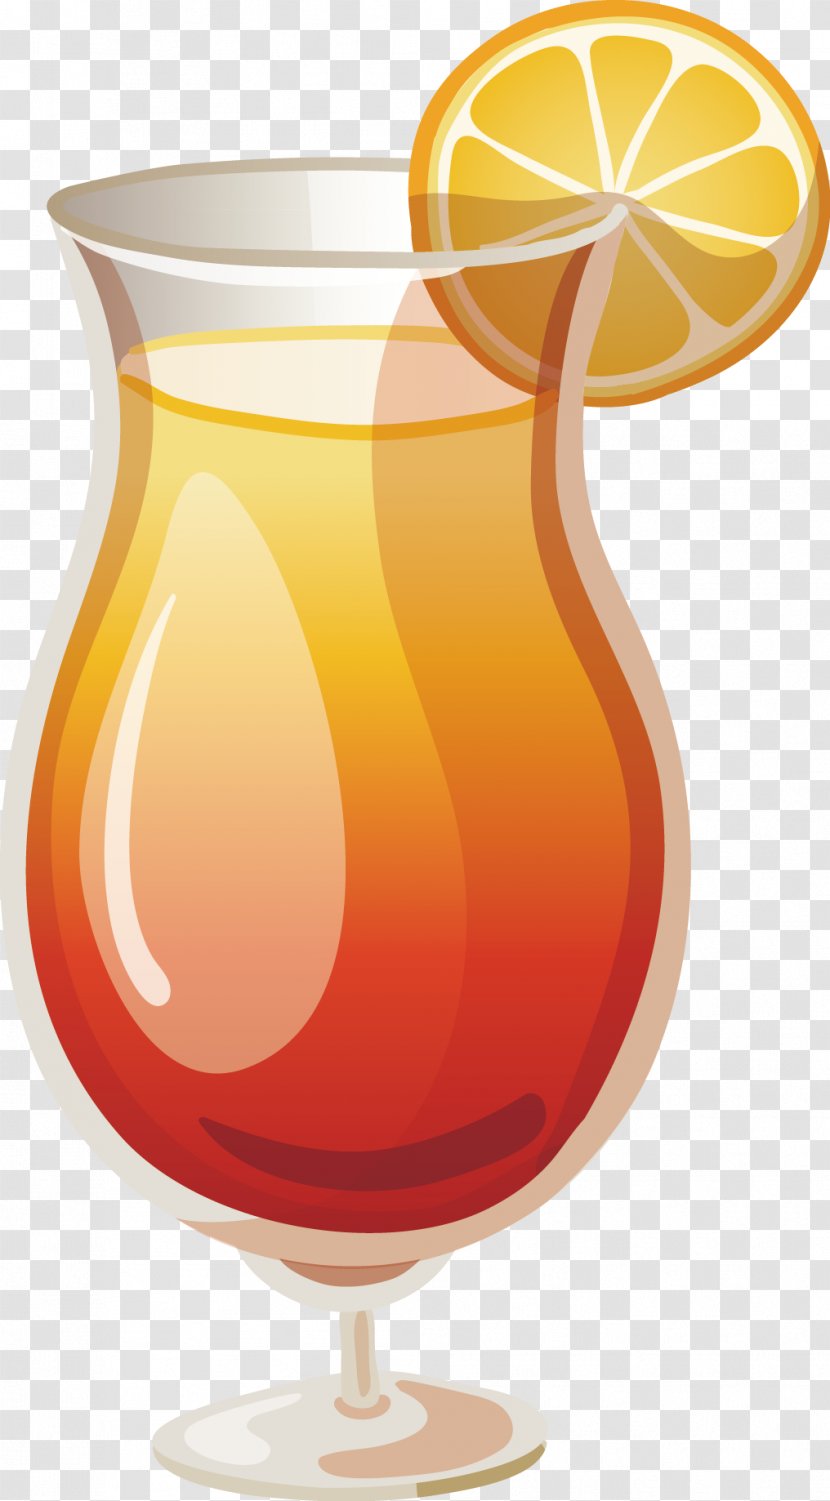 Orange Juice Sea Breeze Drink Non-alcoholic - Harvey Wallbanger - Is Beautifully Painted Transparent PNG